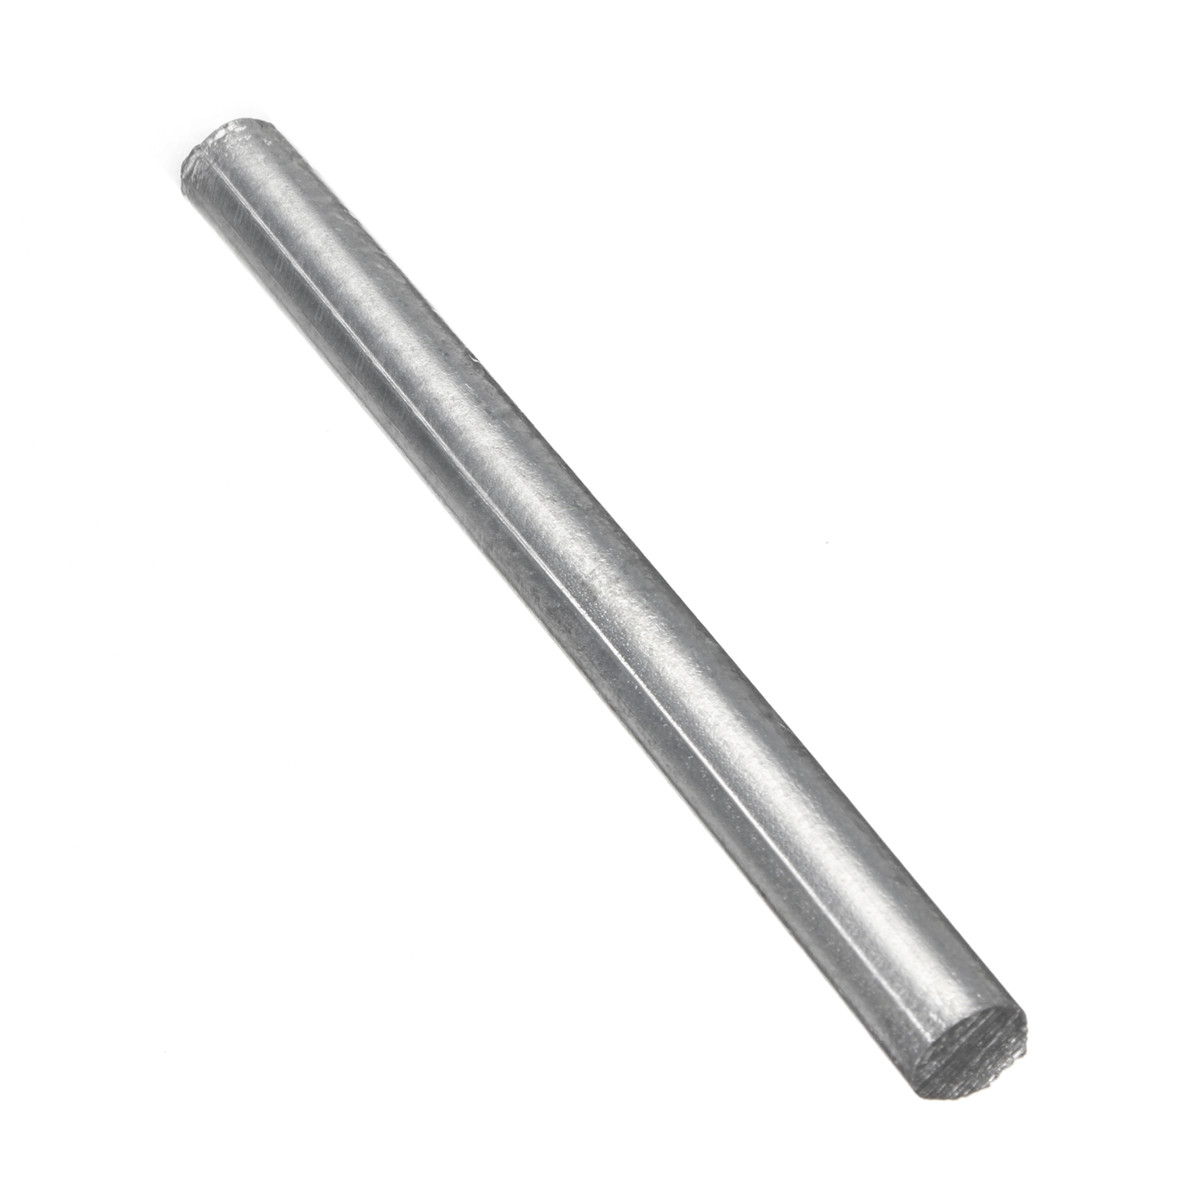 04-inch-x-4-inch-High-Purity-Zn-9995-Zinc-Metal-Rod-Anode-Electroplating-Solid-Round-Bar-1396373-5